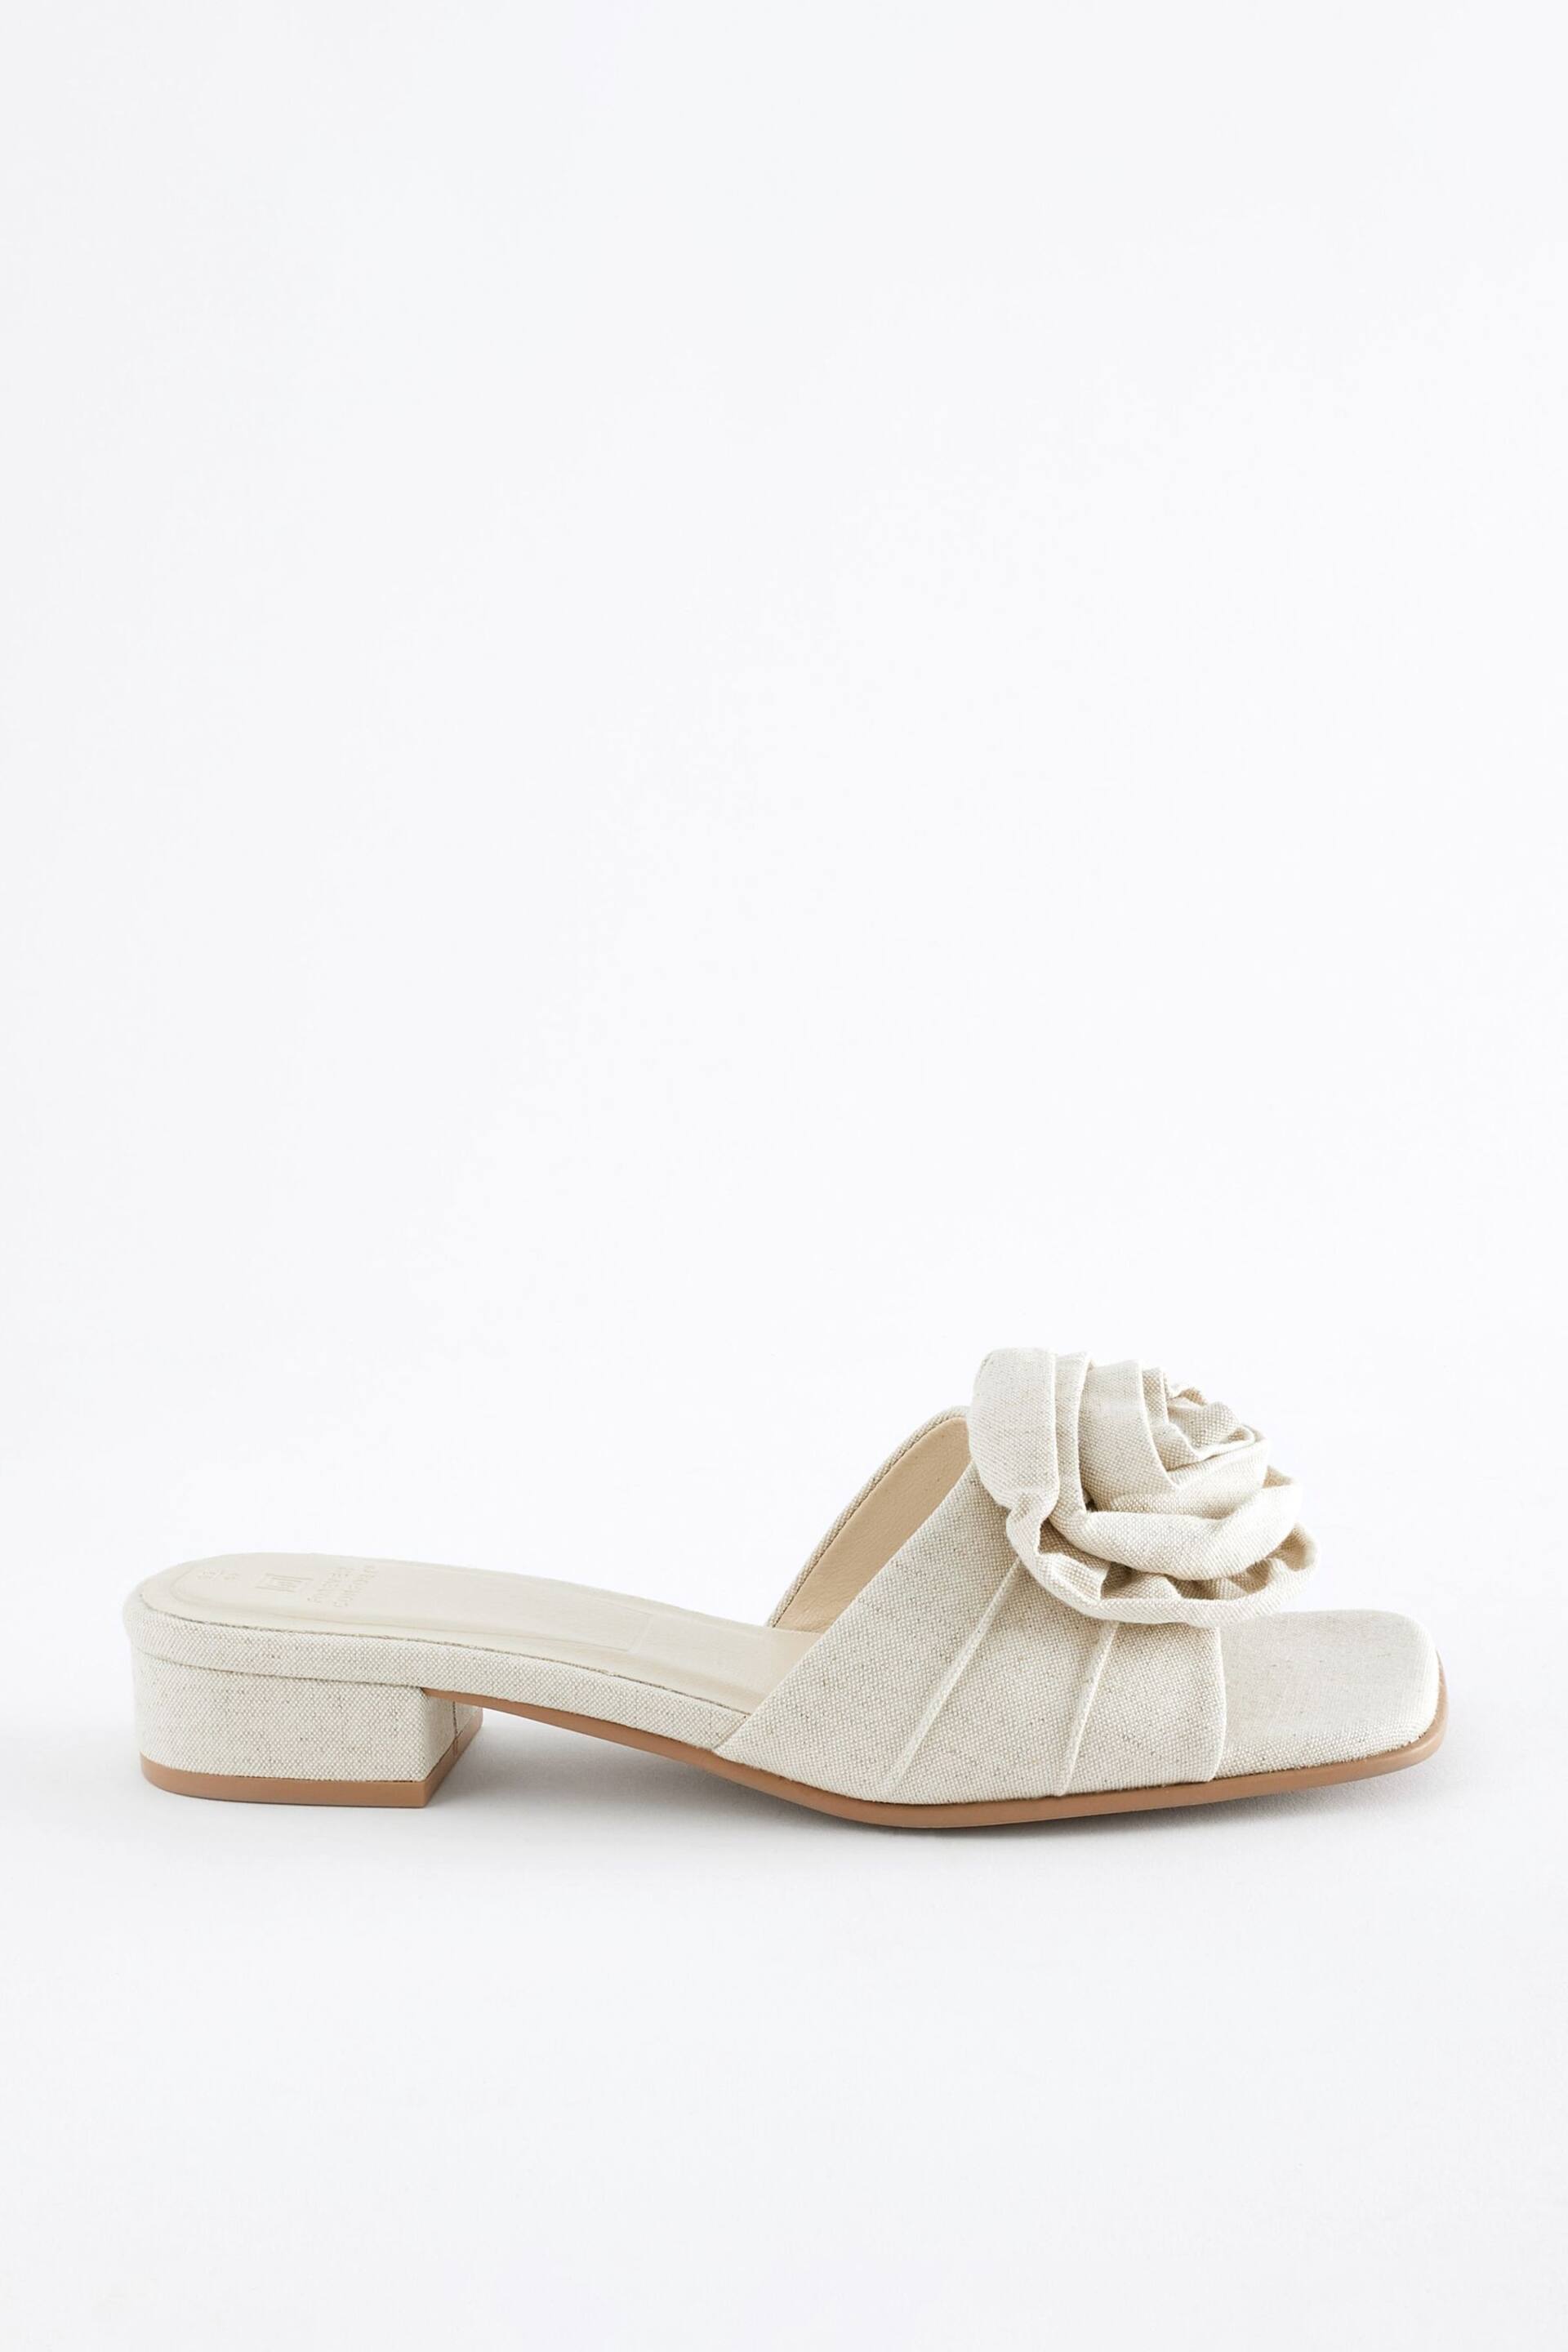 Cream Forever Comfort ® Corsage Flower Mules - Image 6 of 10